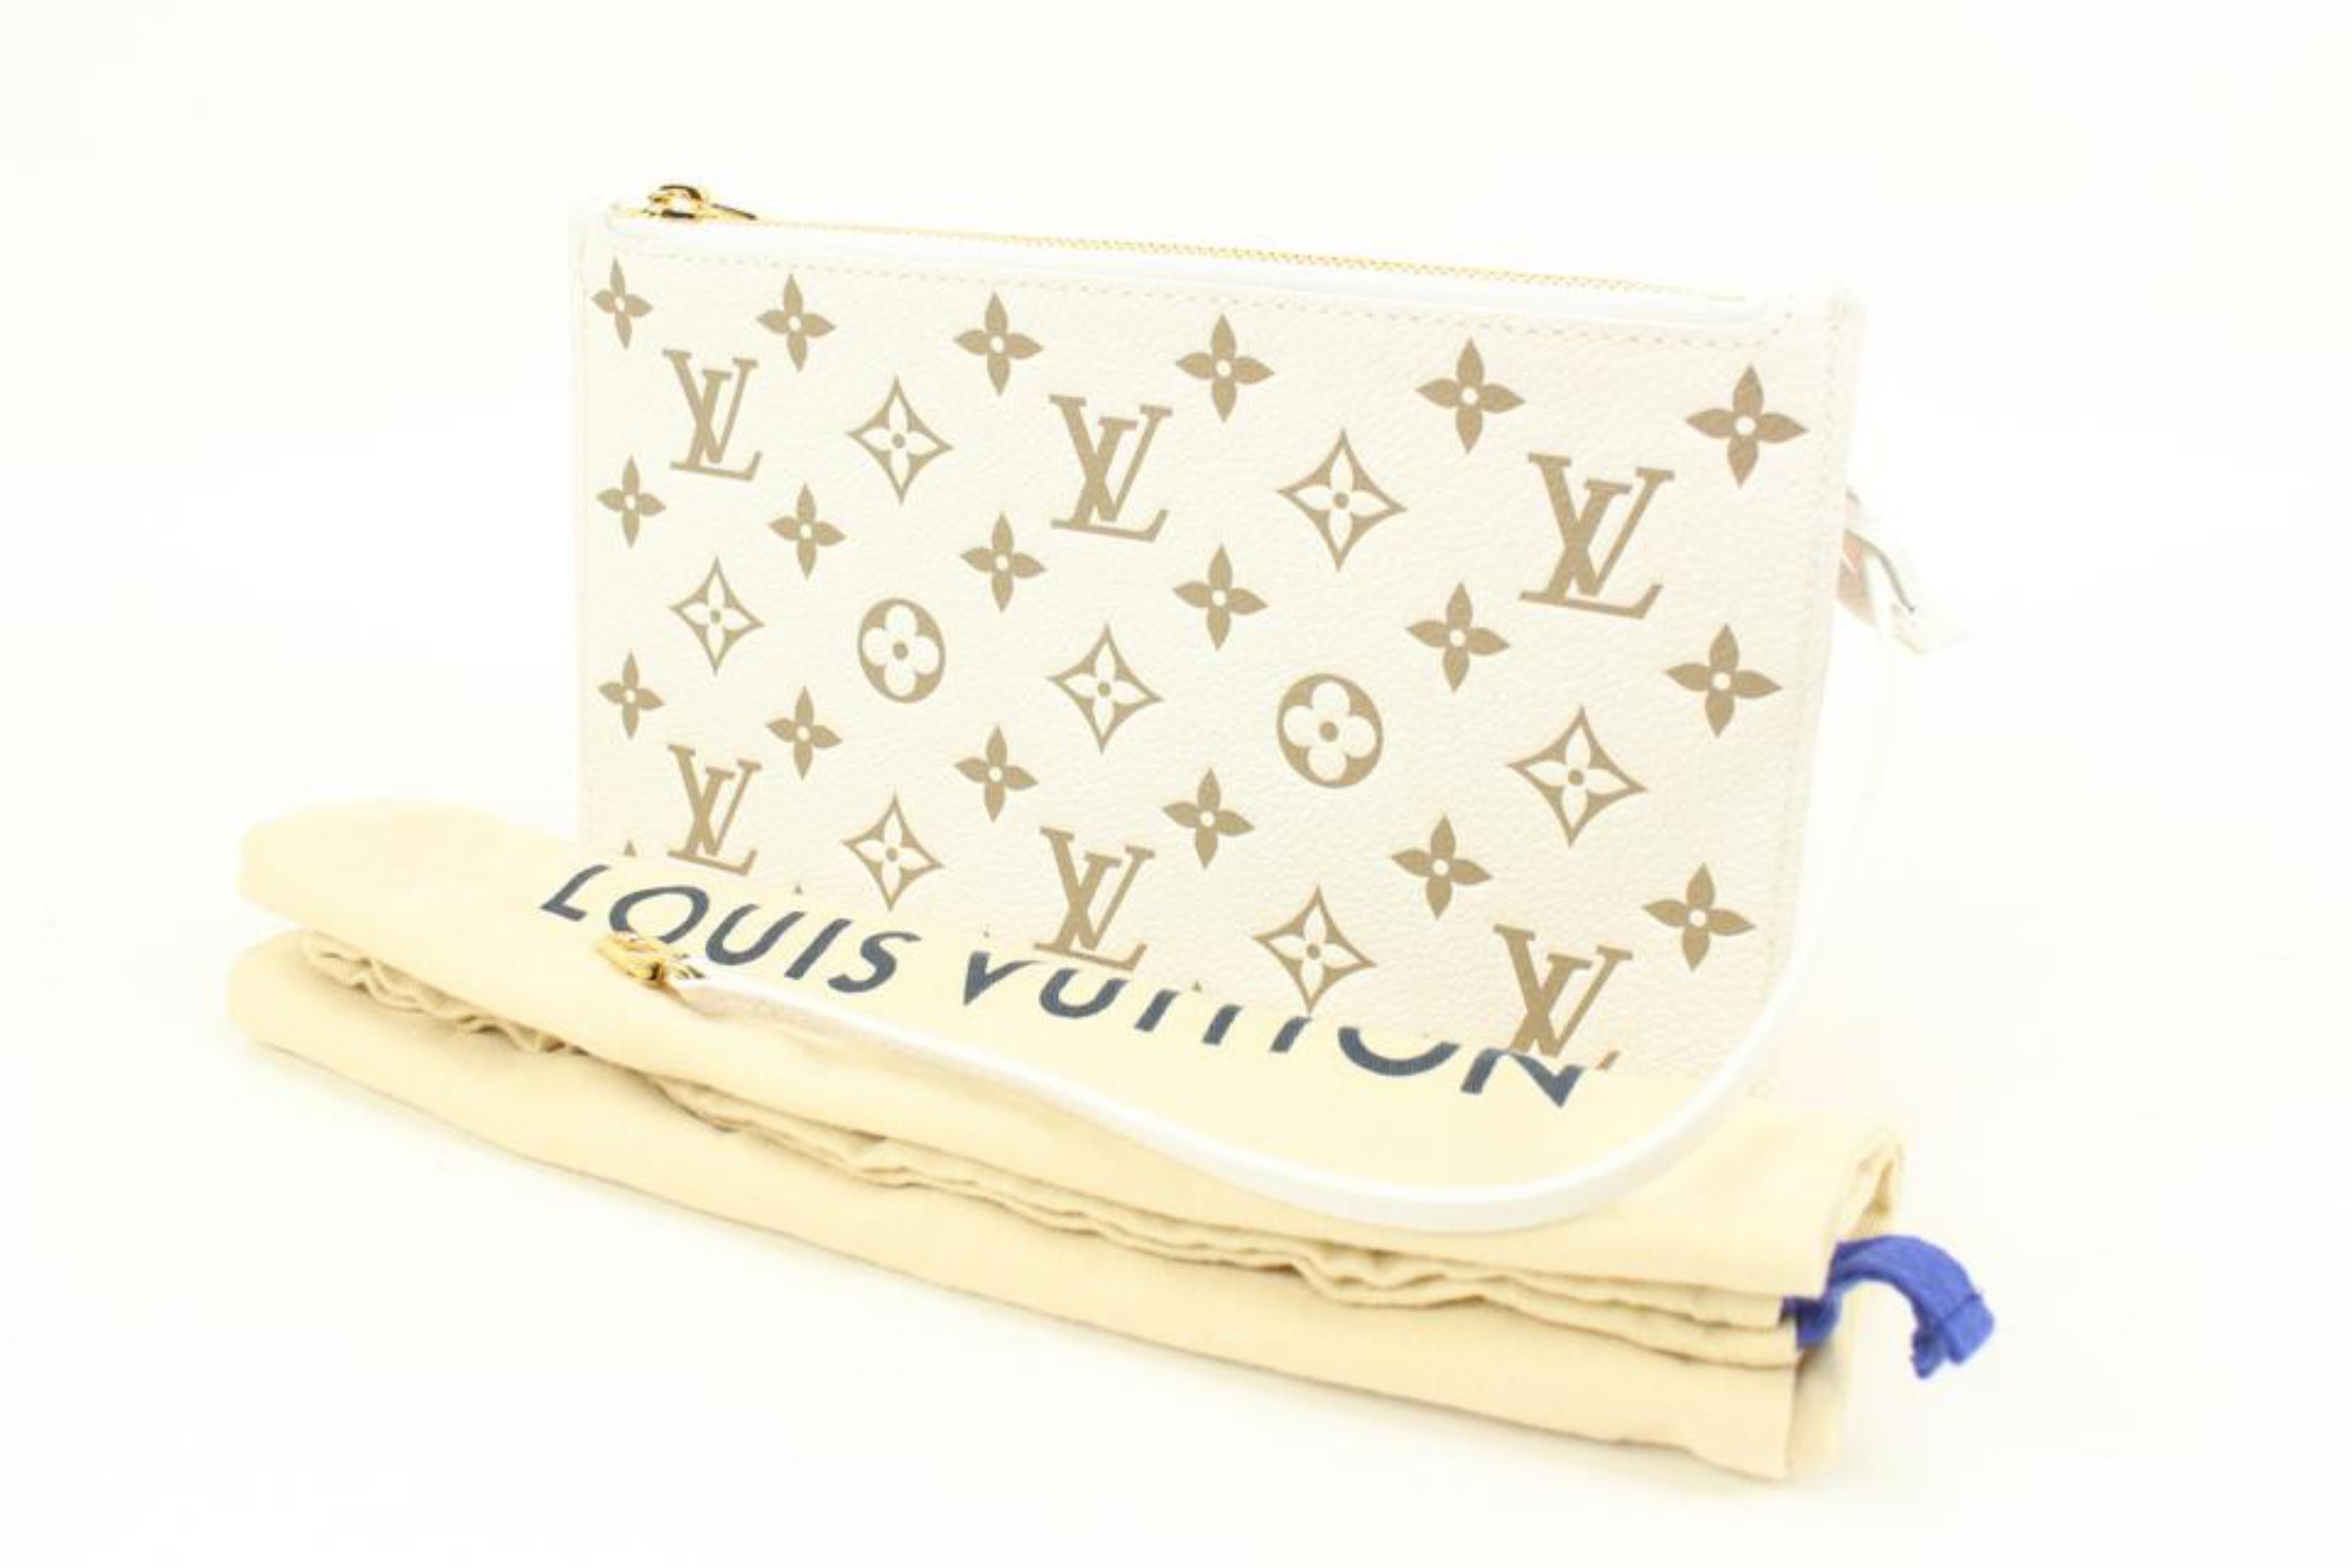 Louis Vuitton Limited Beige Monogram Empreinte Neverfull Pochette MM or GM 46lk32
Date Code/Serial Number: RFID Chip
Made In: Spain
Measurements: Length:  9.8